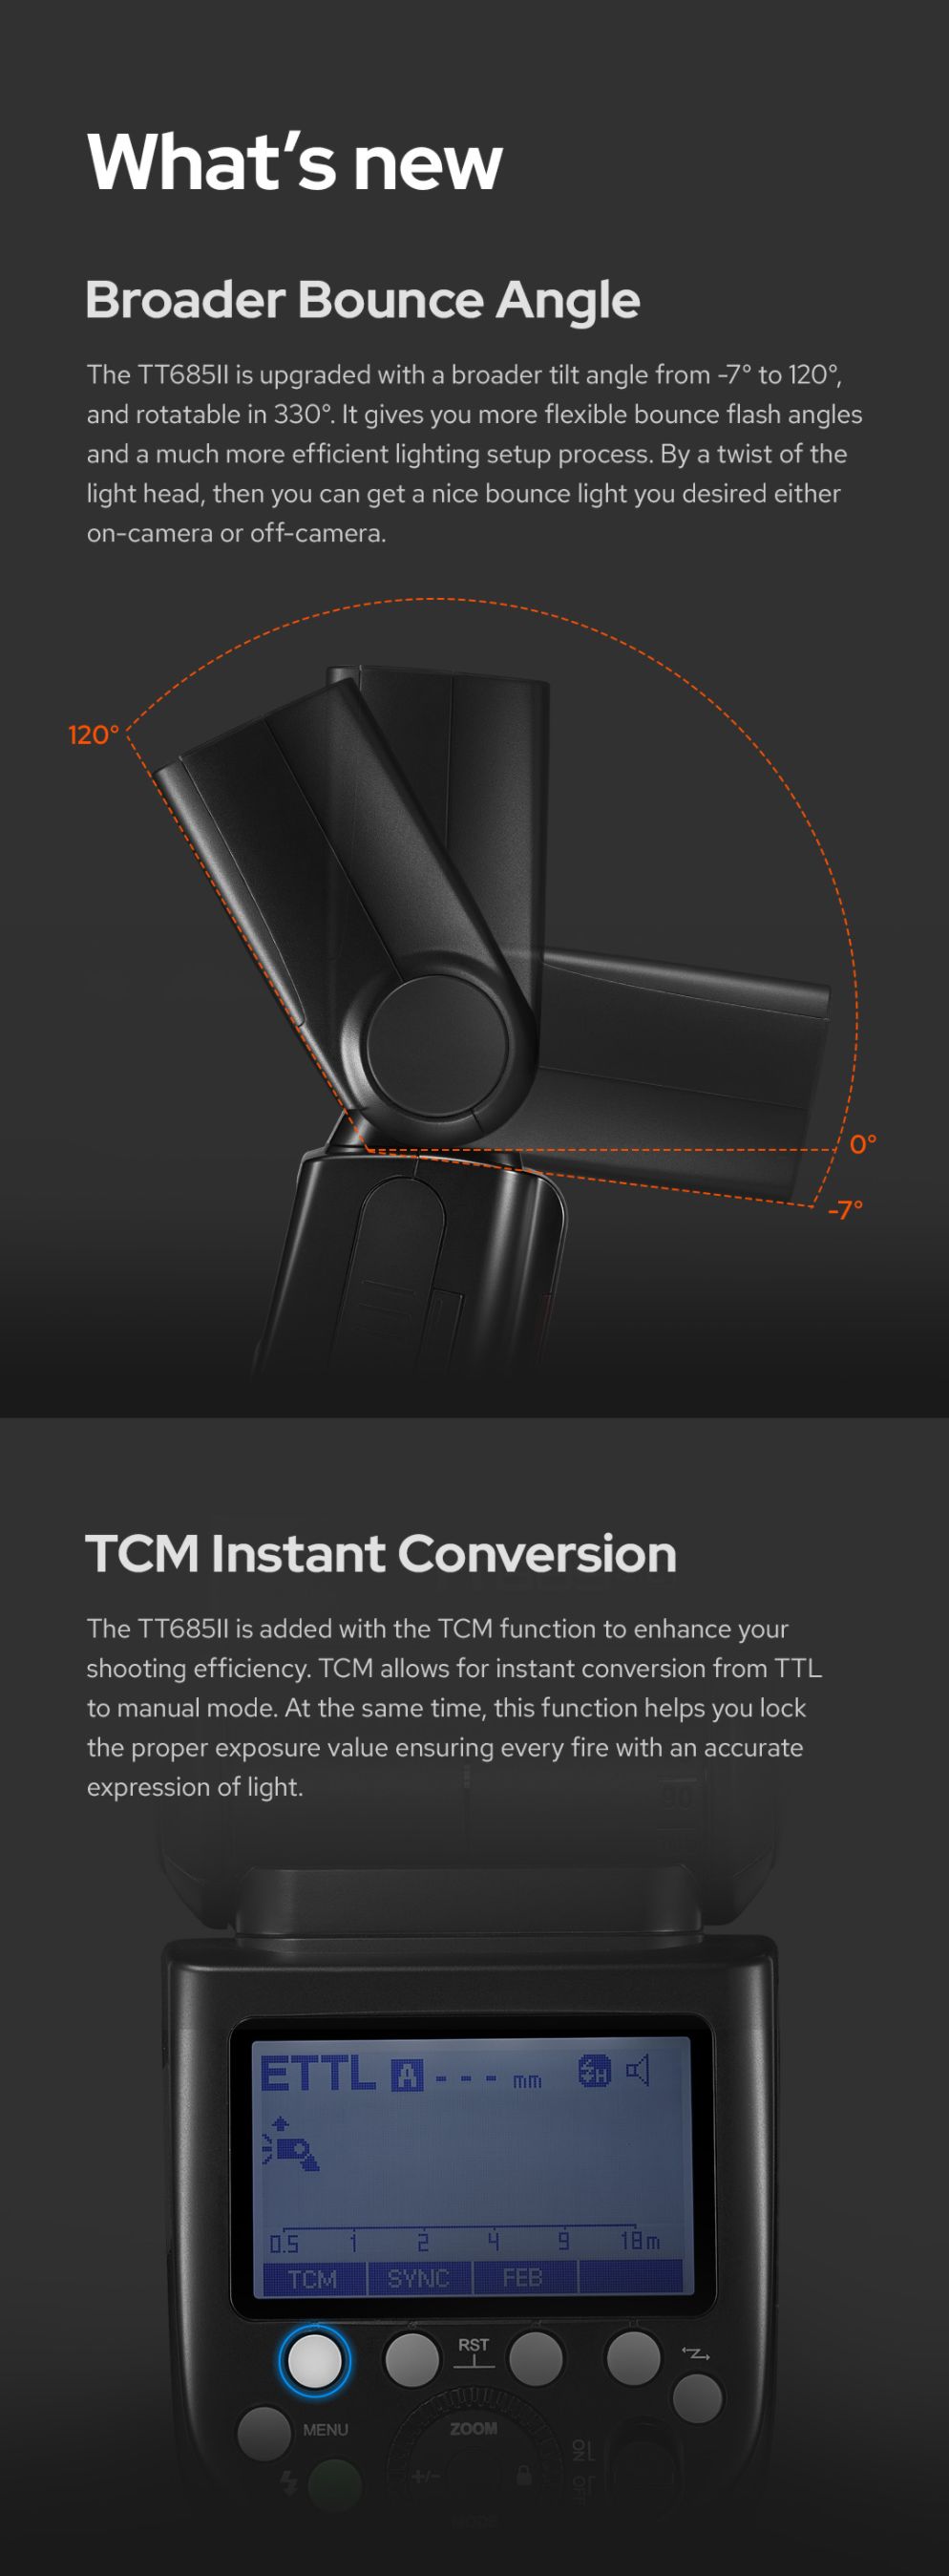 What`s new, broader bounce angle, TCM instant conversion